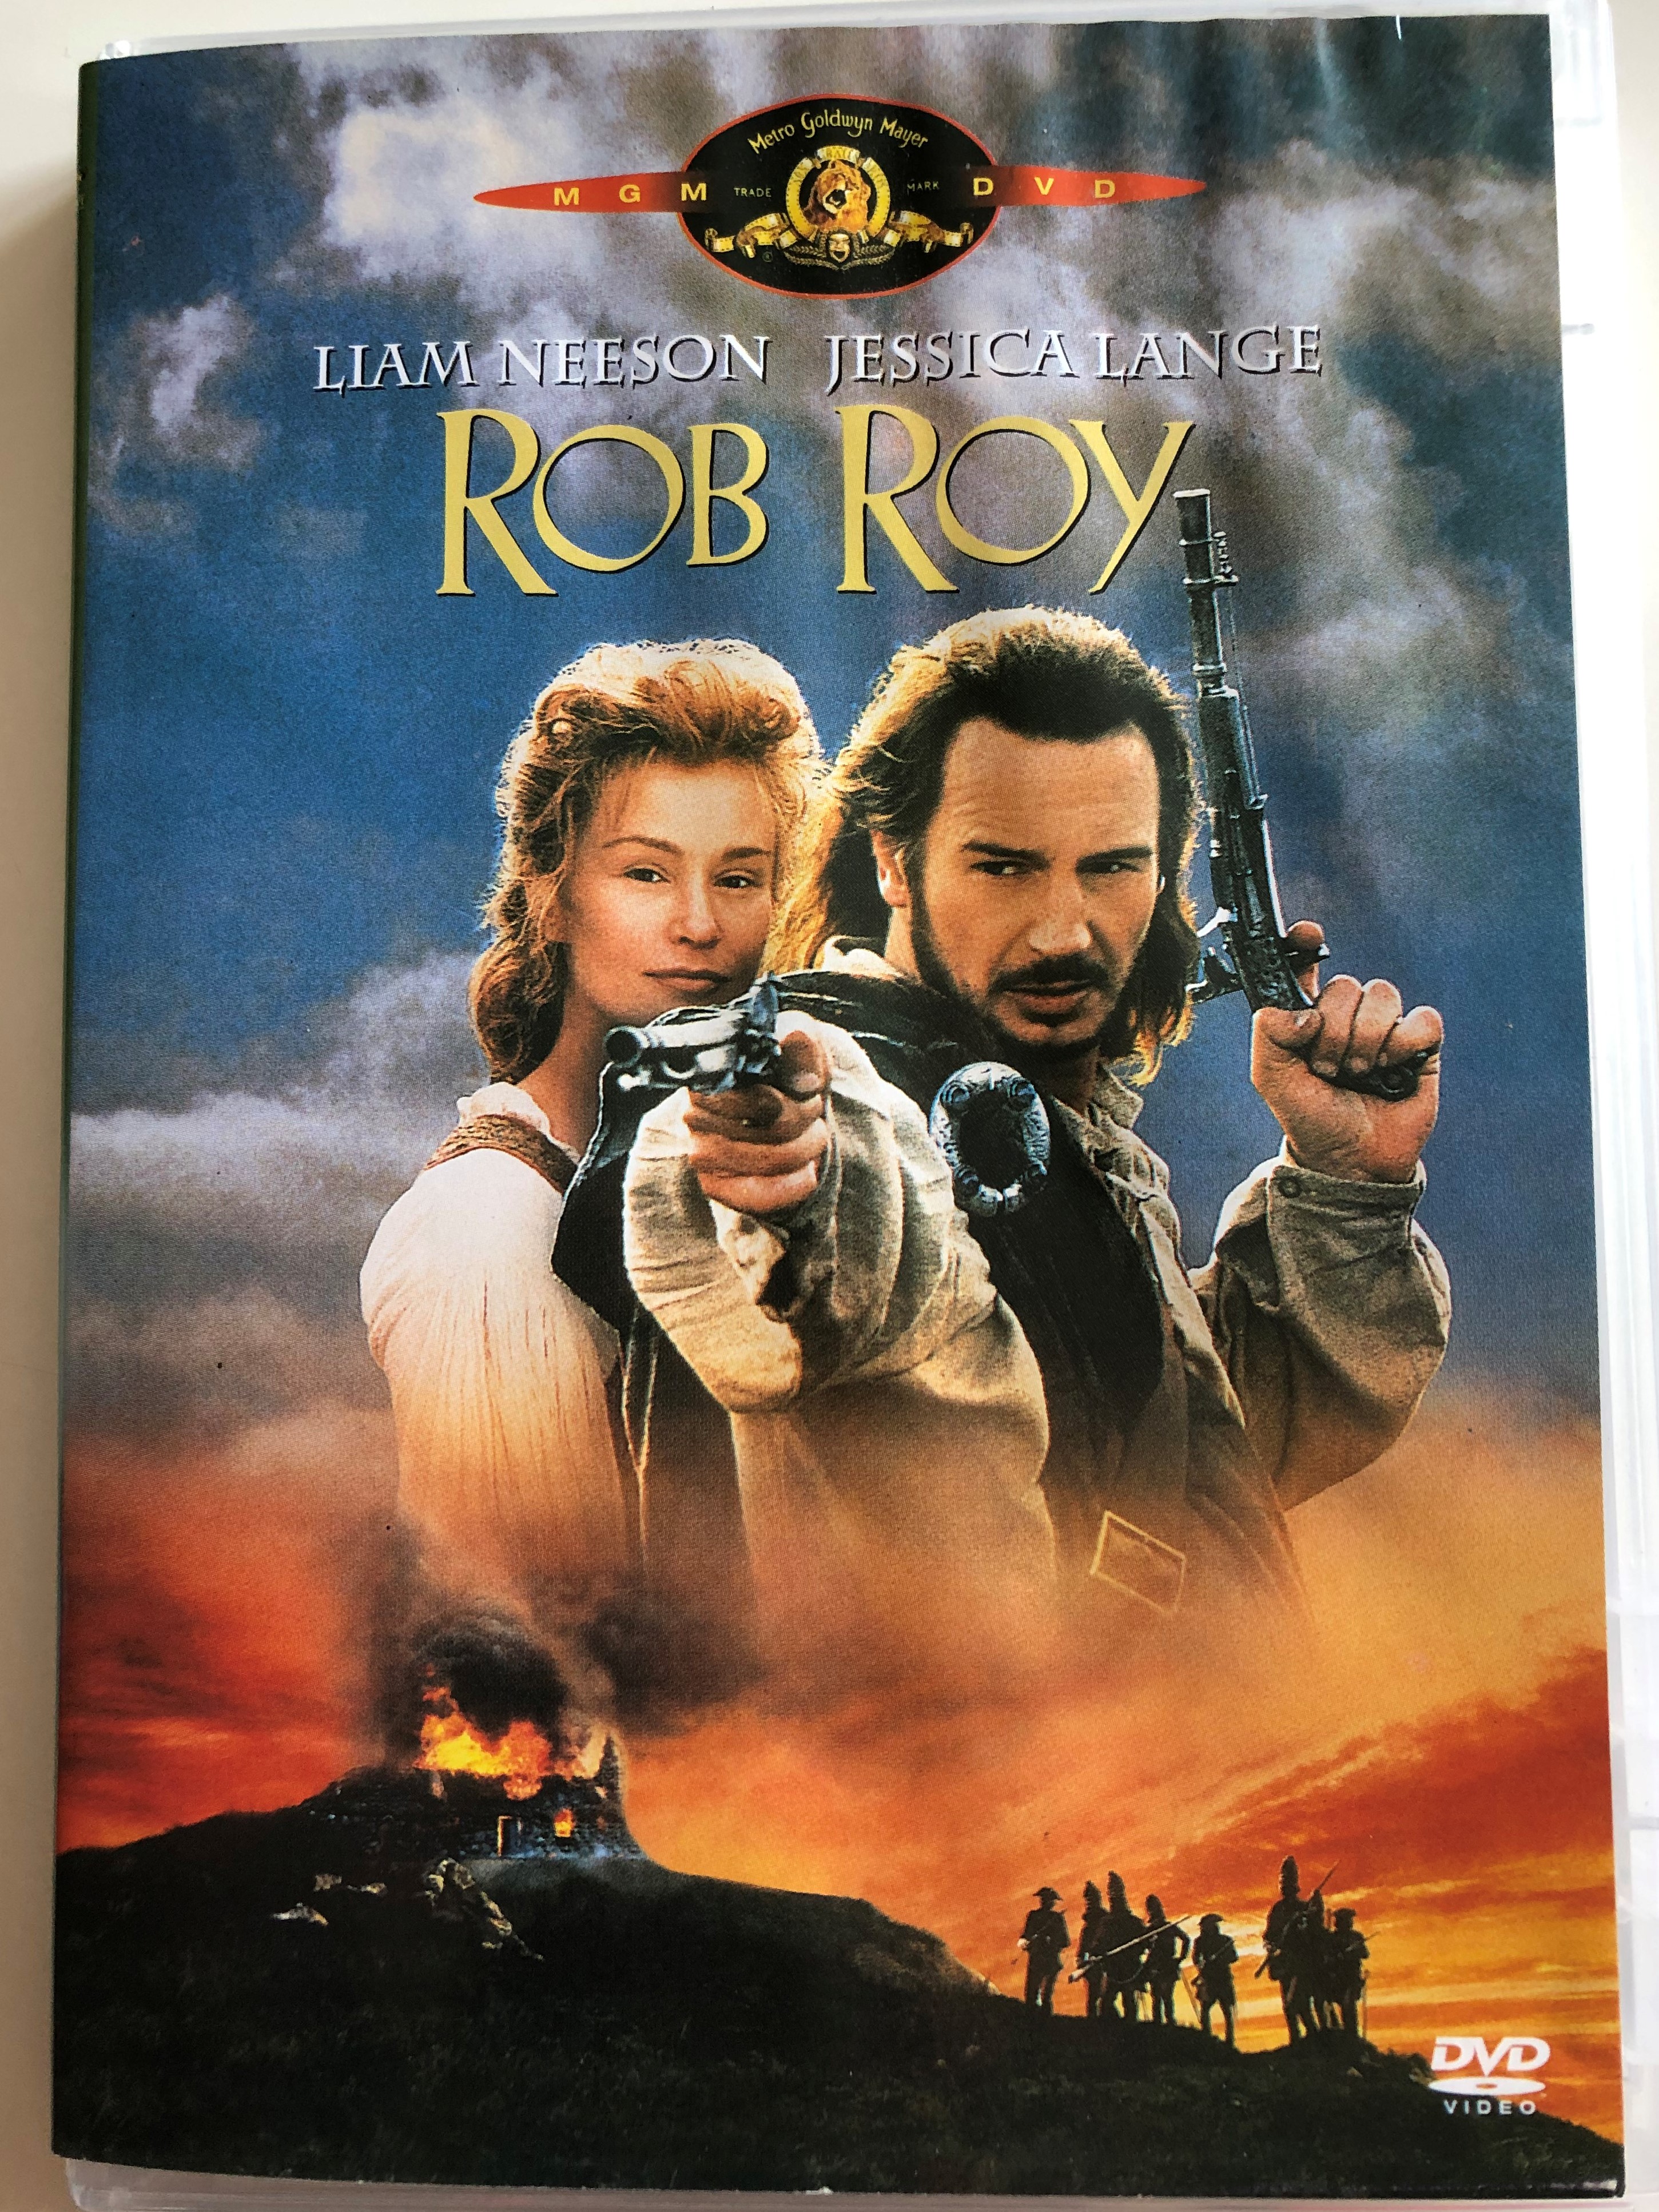 Rob Roy DVD 1995 / Directed by Michael Caton-Jones / Starring: Liam Neeson, Jessica  Lange / Biographical historical drama - Bible in My Language